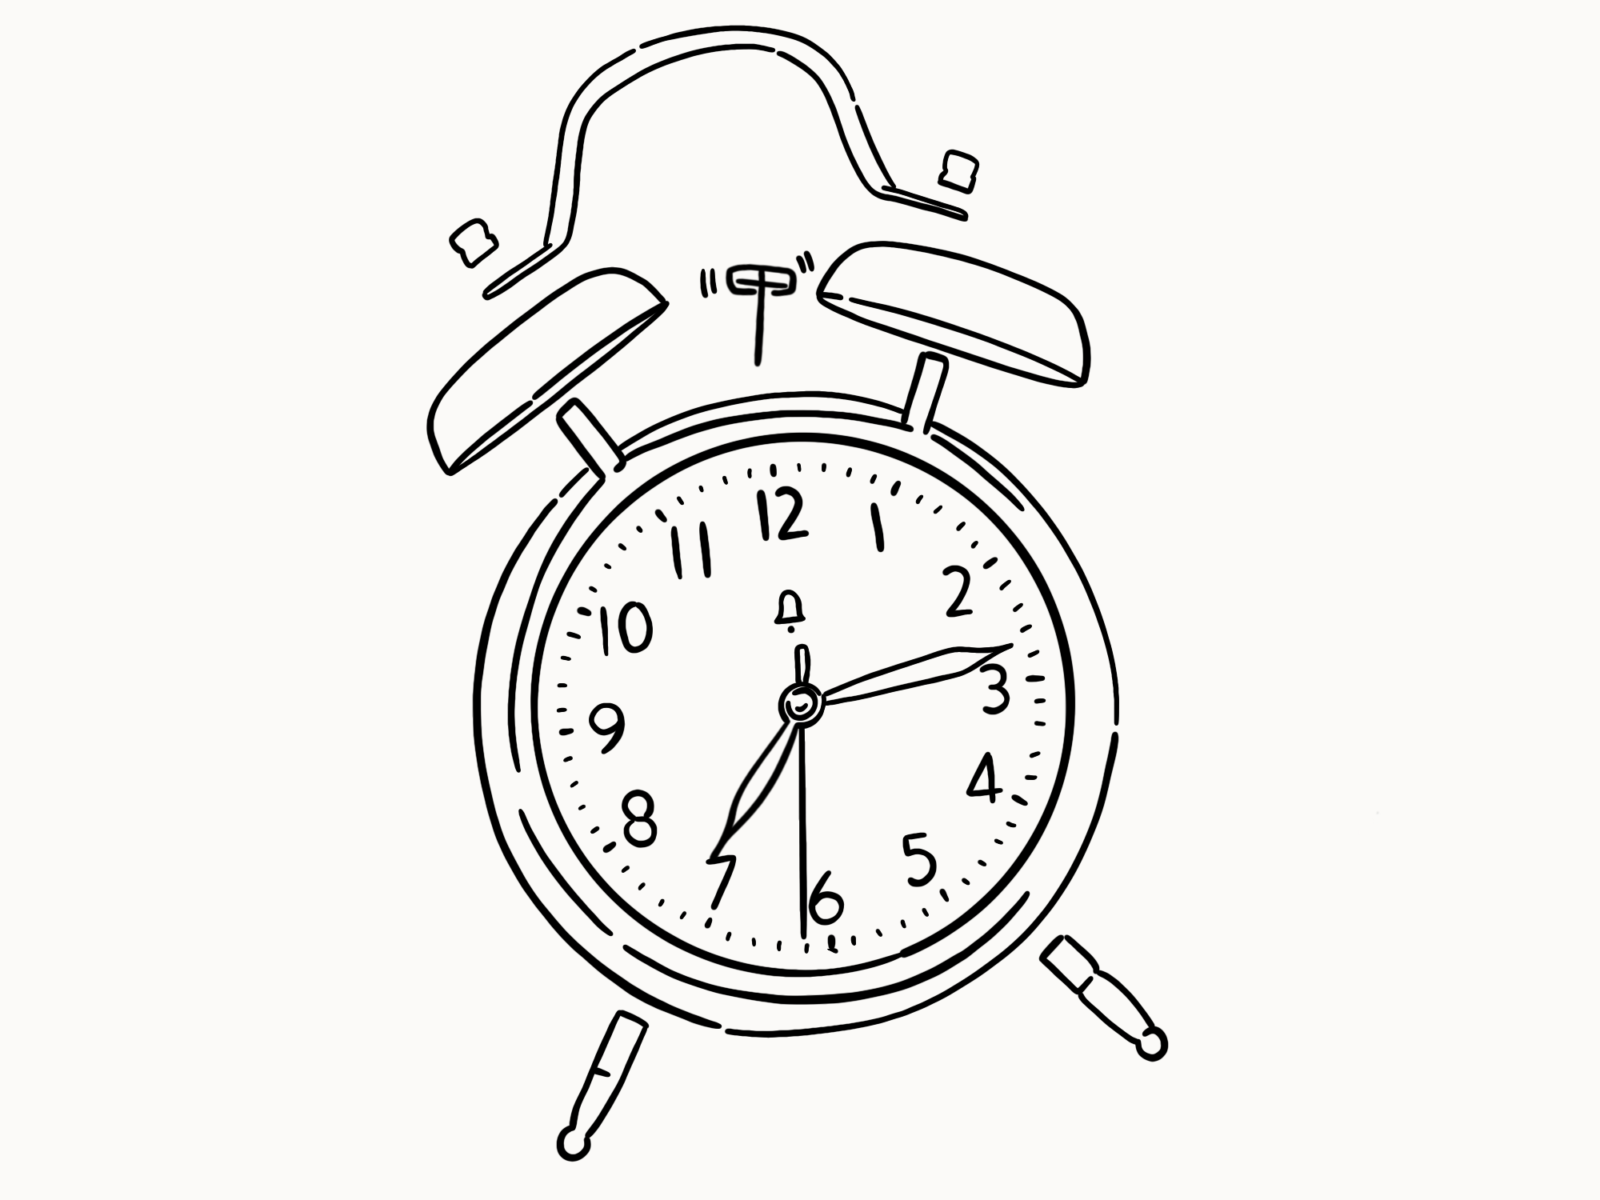 Alarm Clock Drawing - To make the alarm clock stand, you'll need to